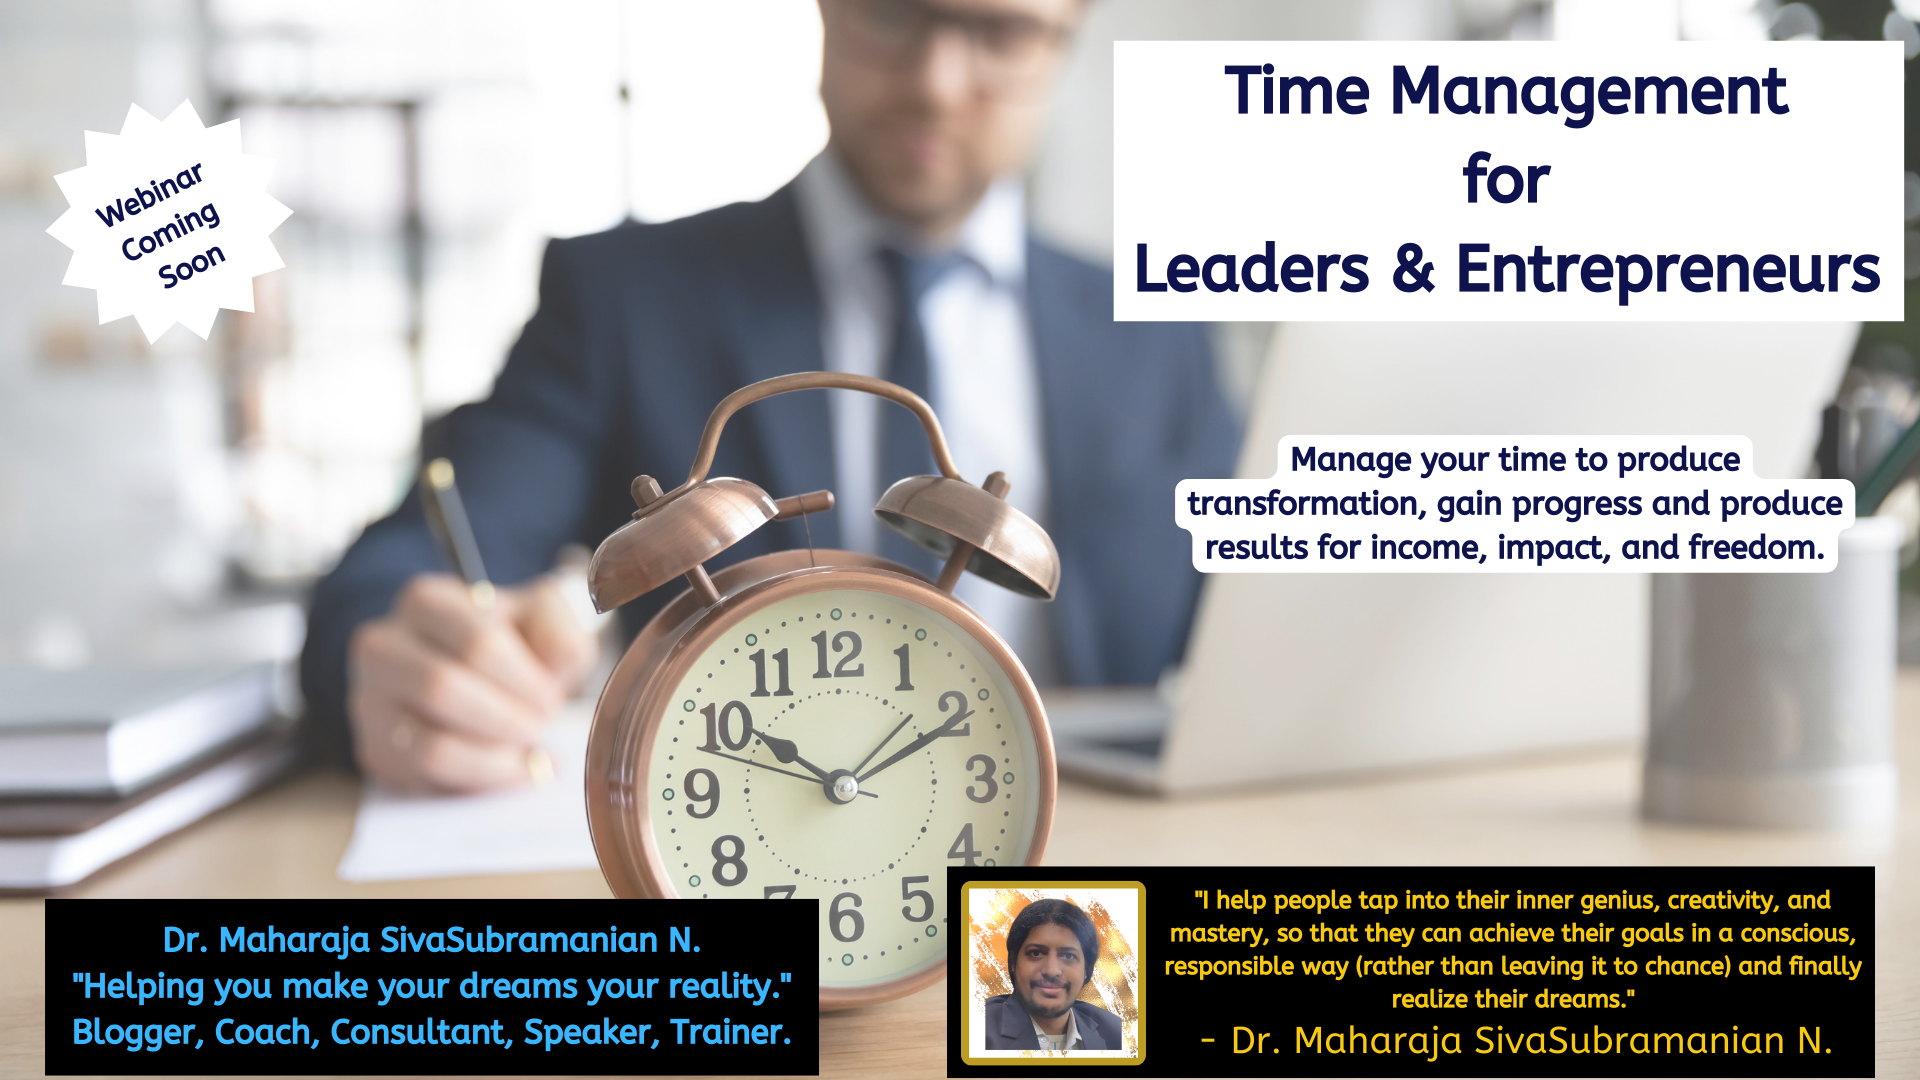 Time Management for Leaders and Entrepreneurs. – Upcoming free webinar.